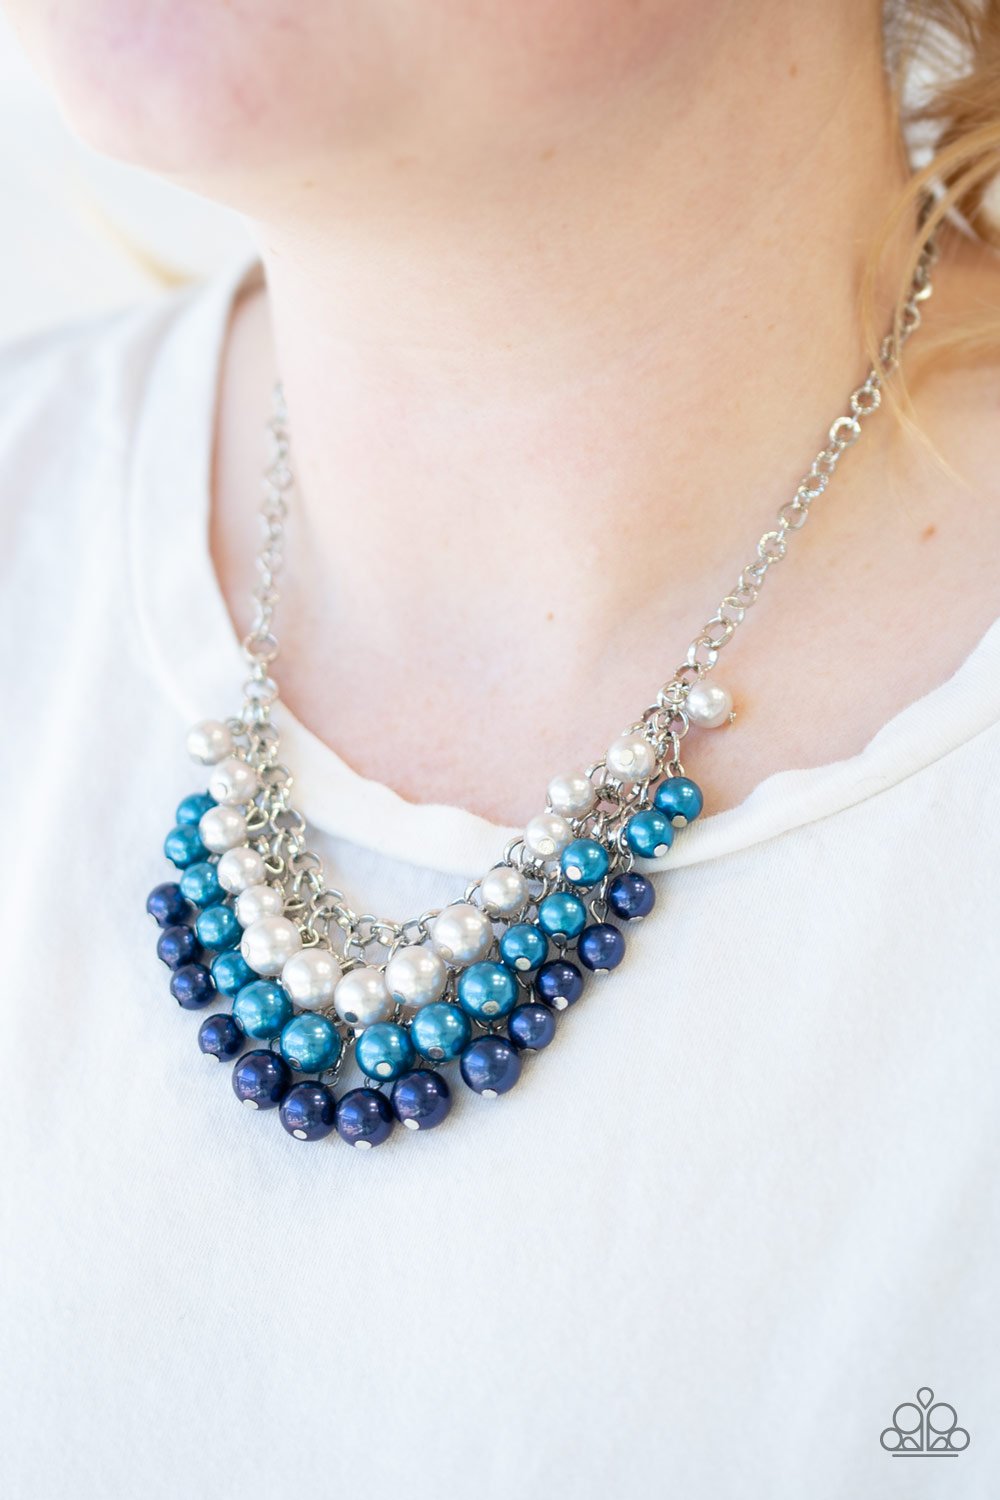 Run for the HEELS - blue - Paparazzi necklace